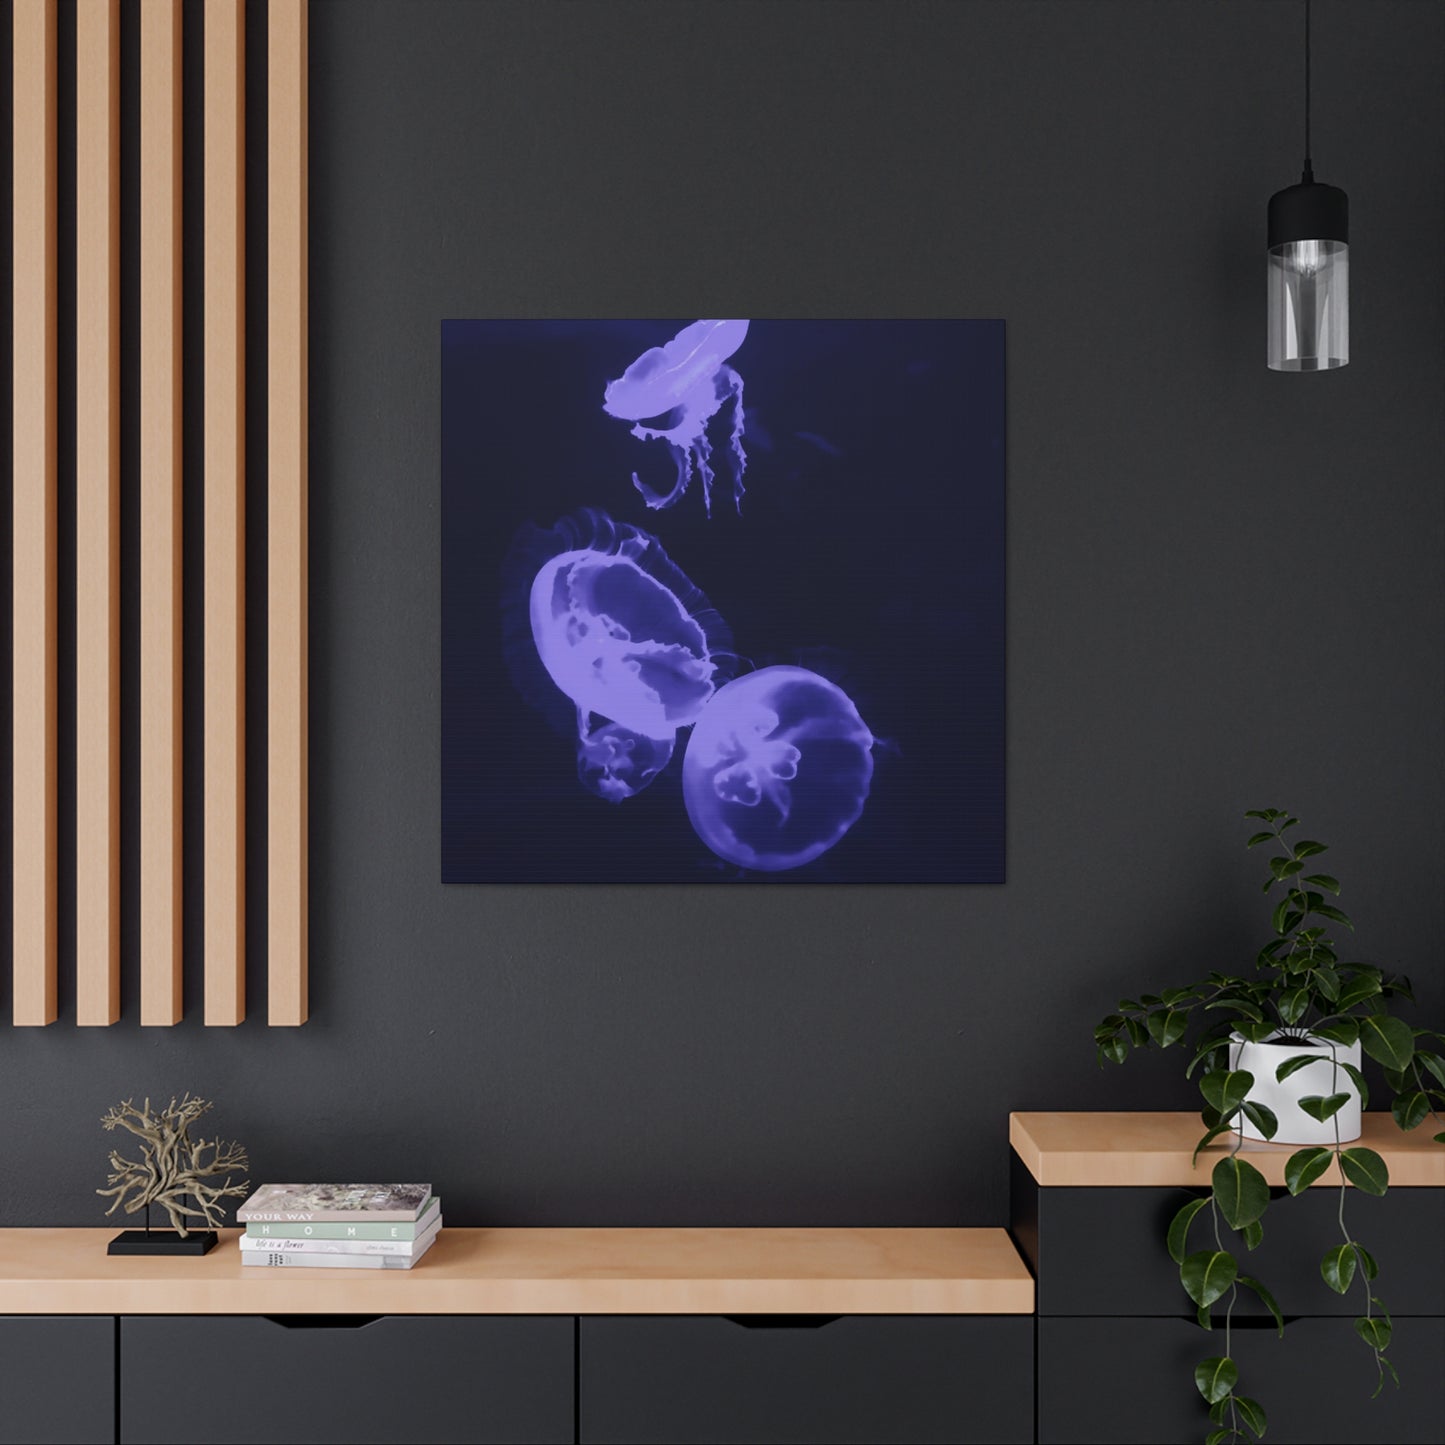 Moon Jelly 01 - Gallery Canvas